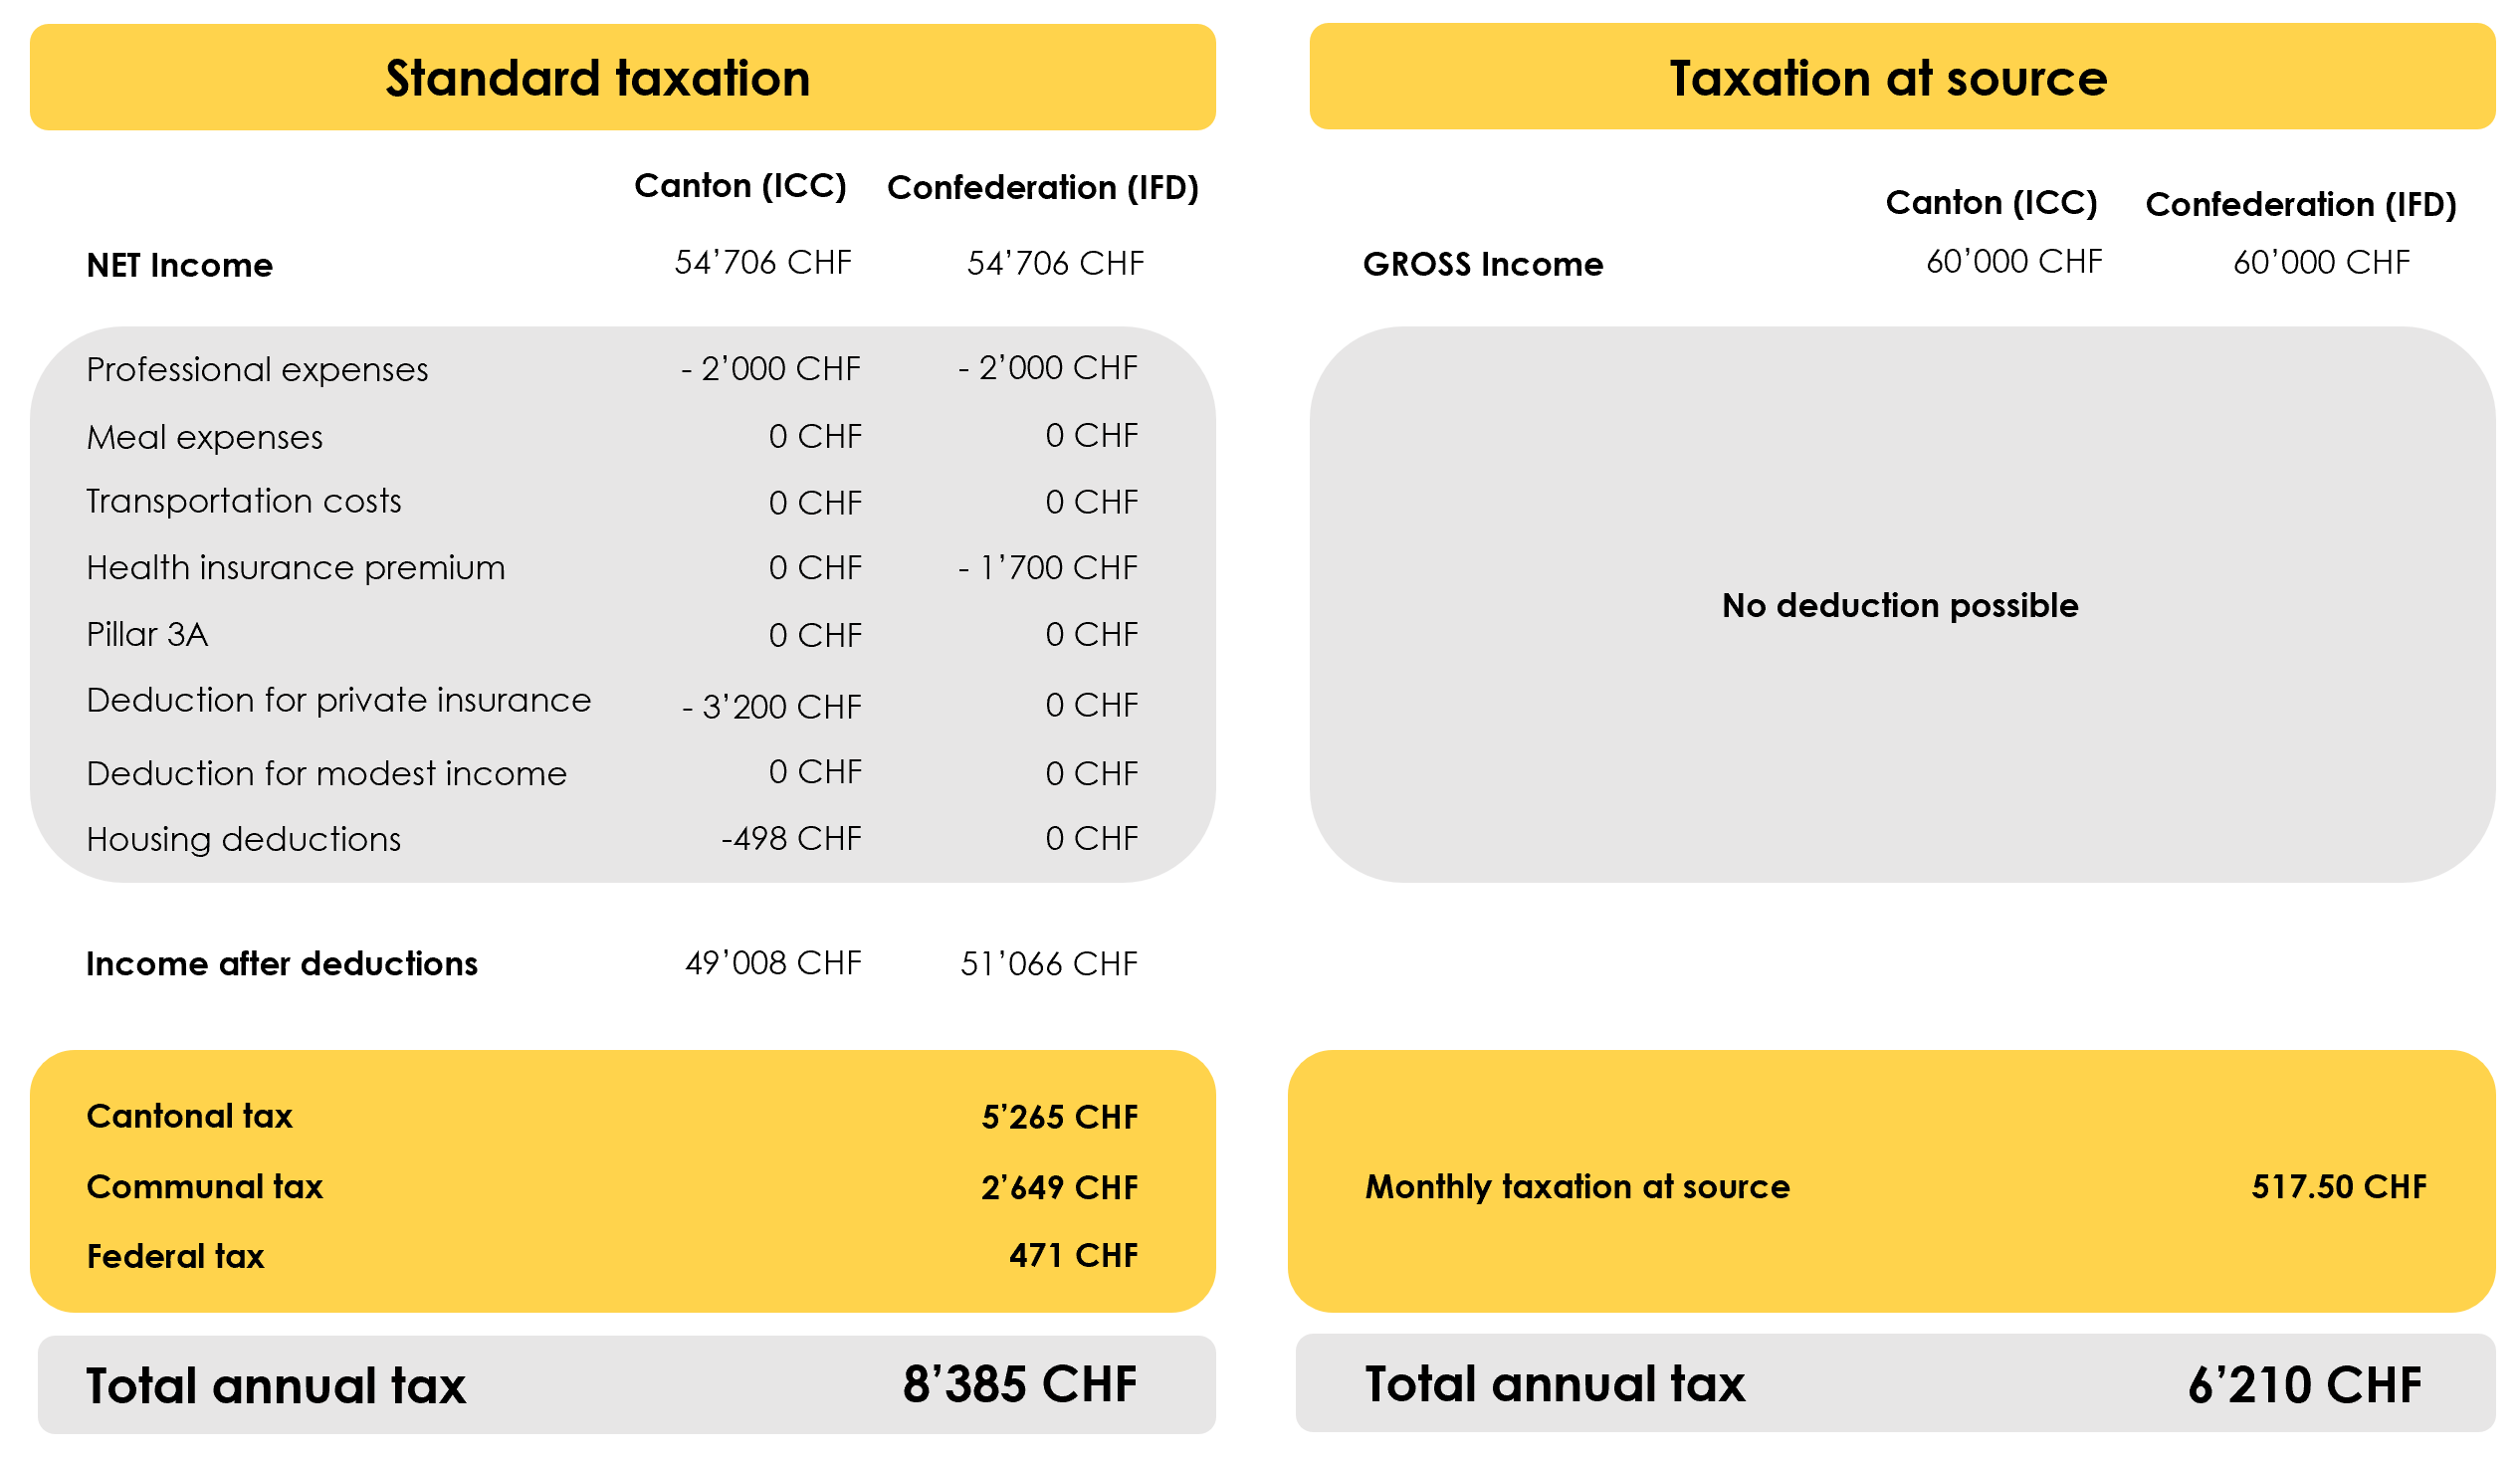 Example 2: Comparison between ordinary taxation and taxation at source without deductions  